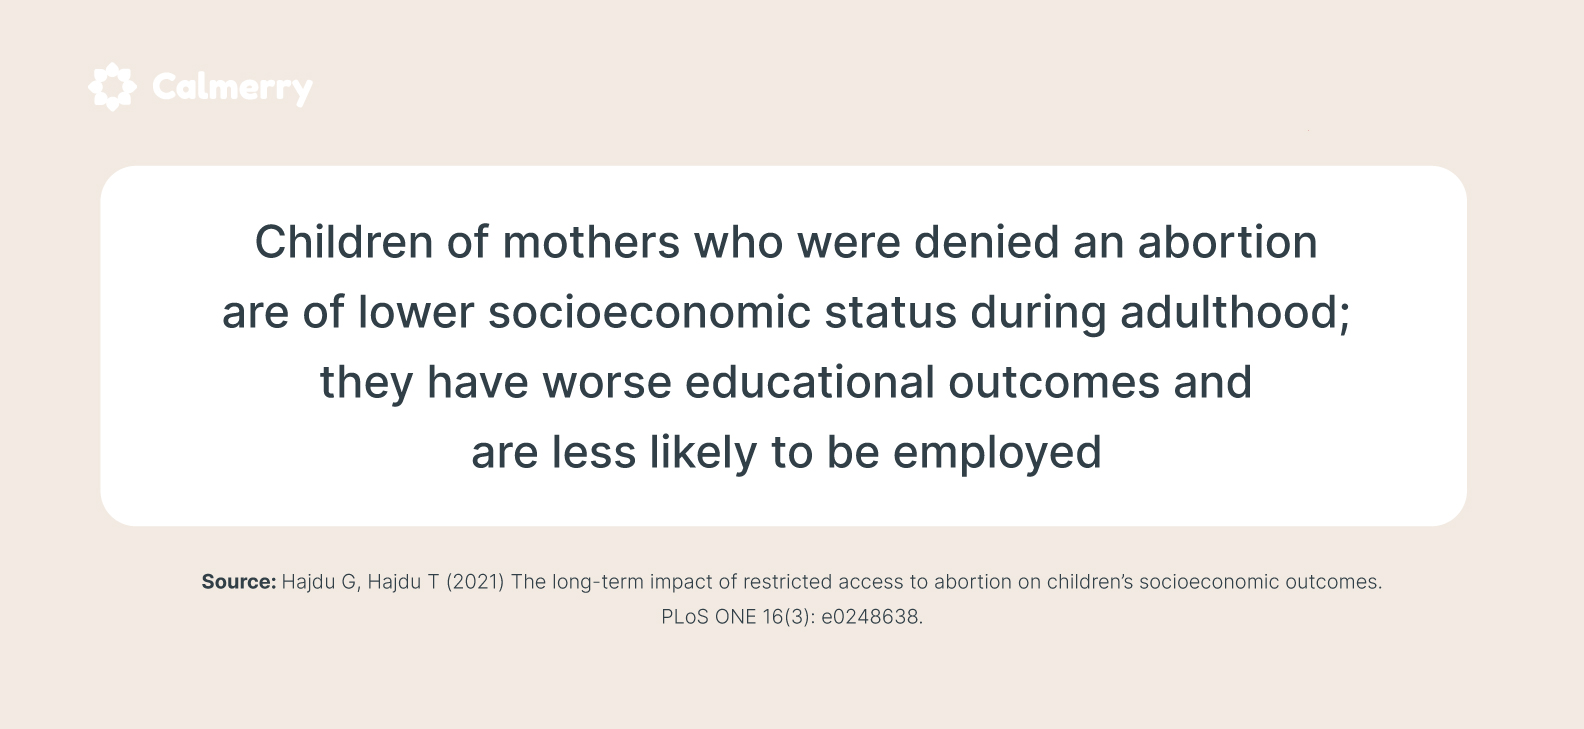 Children of mothers who were denied an abortion are of lower socioeconomic status during adulthood